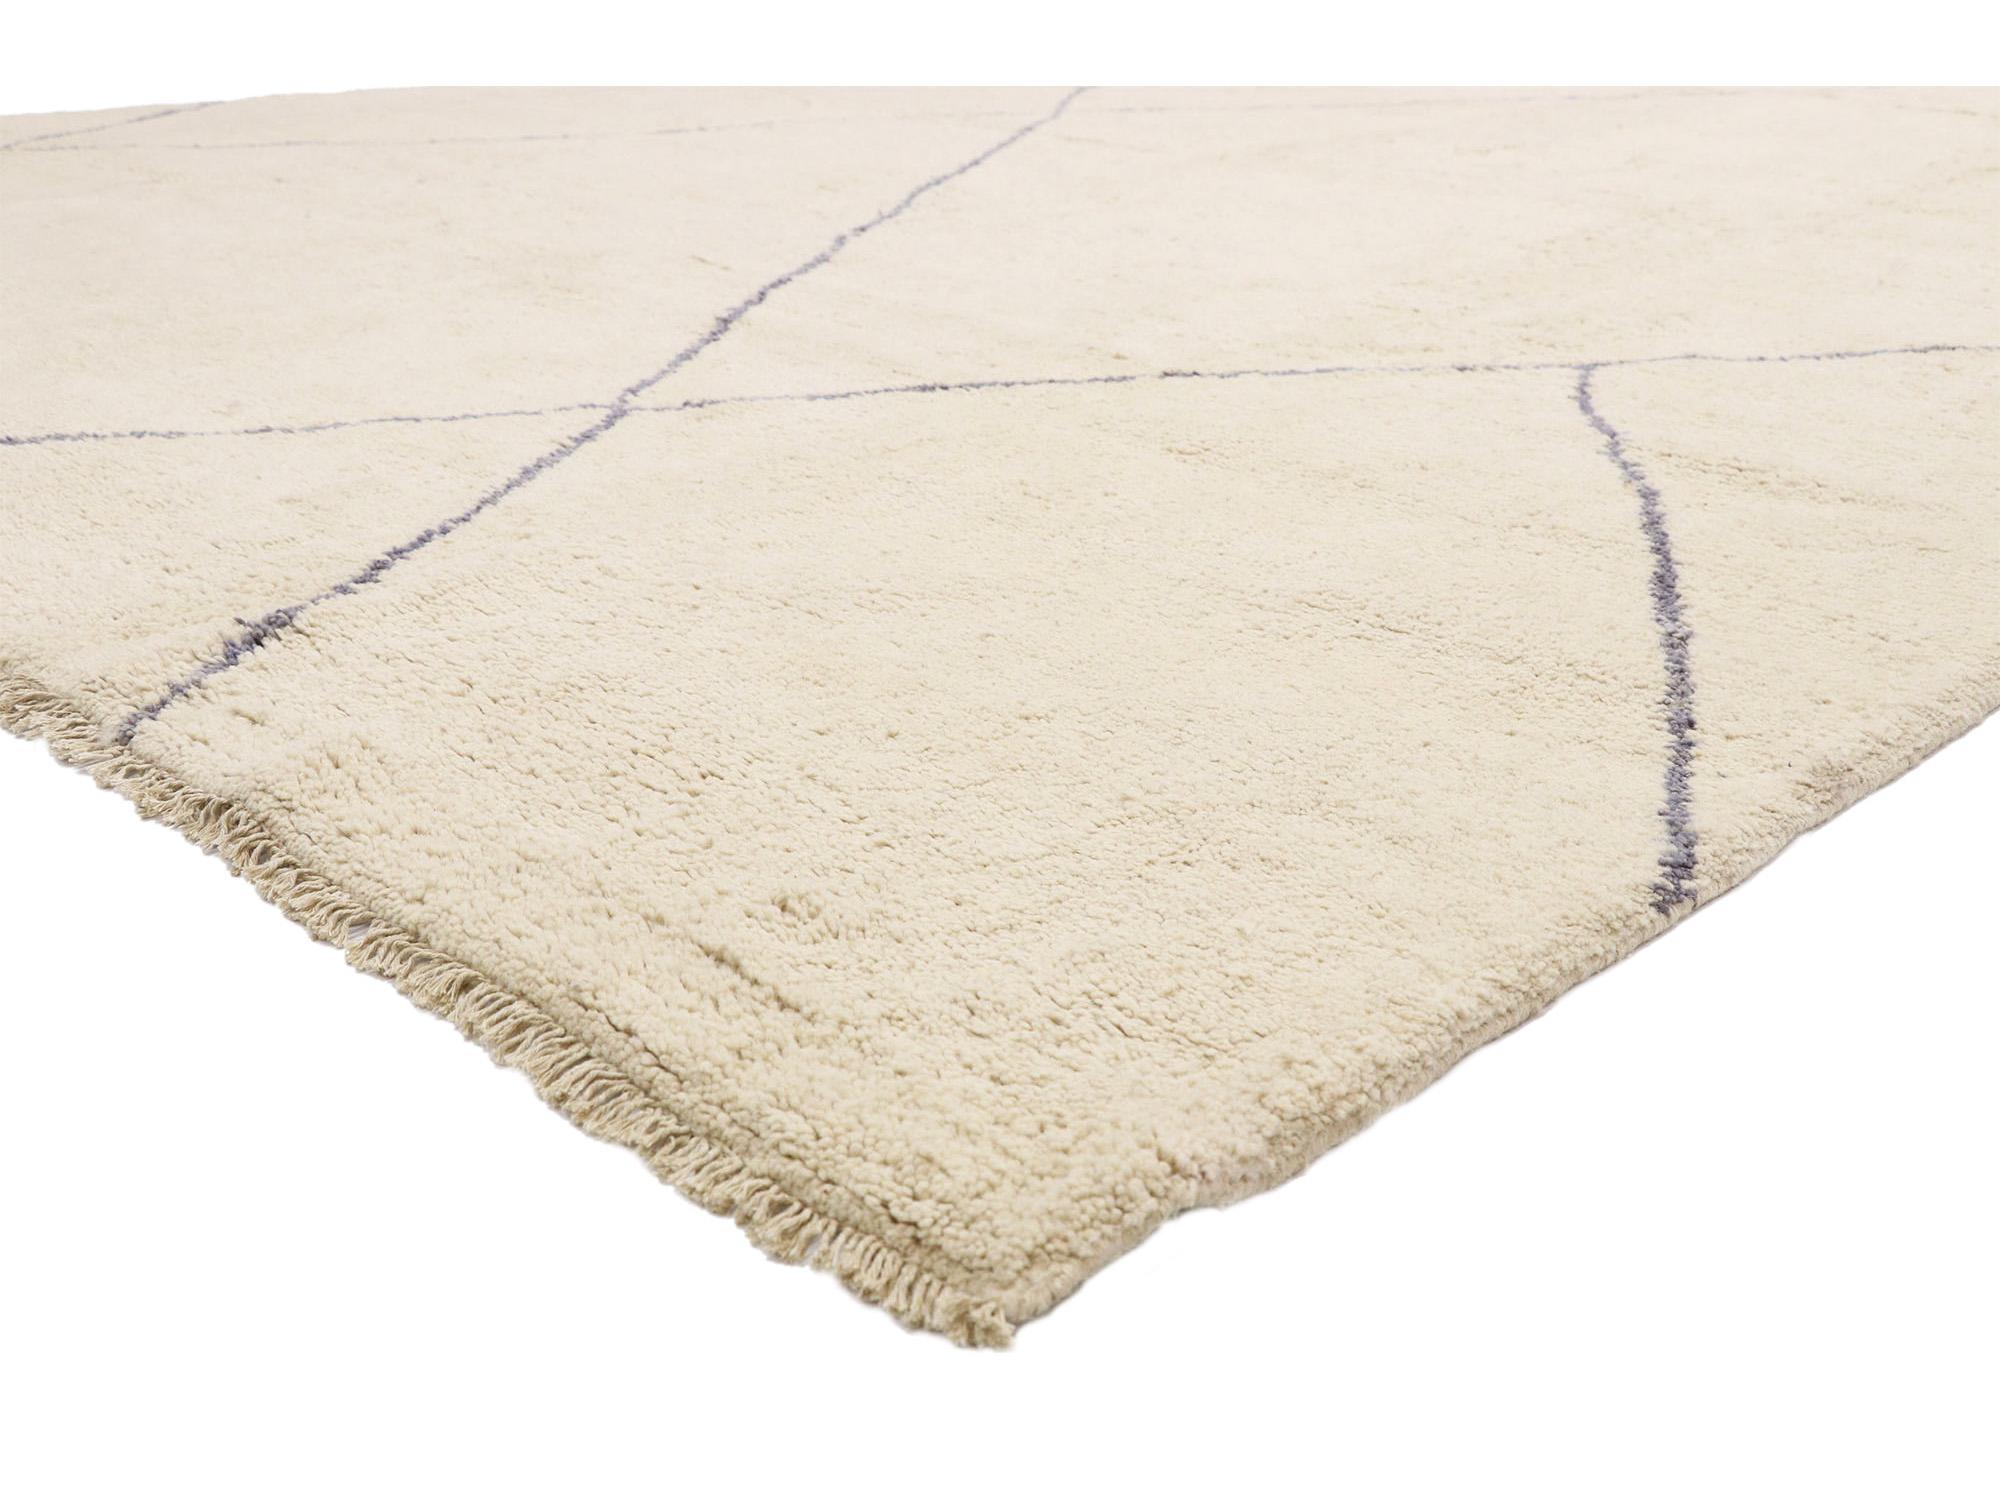 80539 Organic Modern Moroccan Rug, 09'10 x 13'08. In this hand-knotted wool large Moroccan area rug, the essence of Organic Modern design merges seamlessly with the cozy allure of a nomadic lifestyle. Against a creamy-vanilla field, a series of